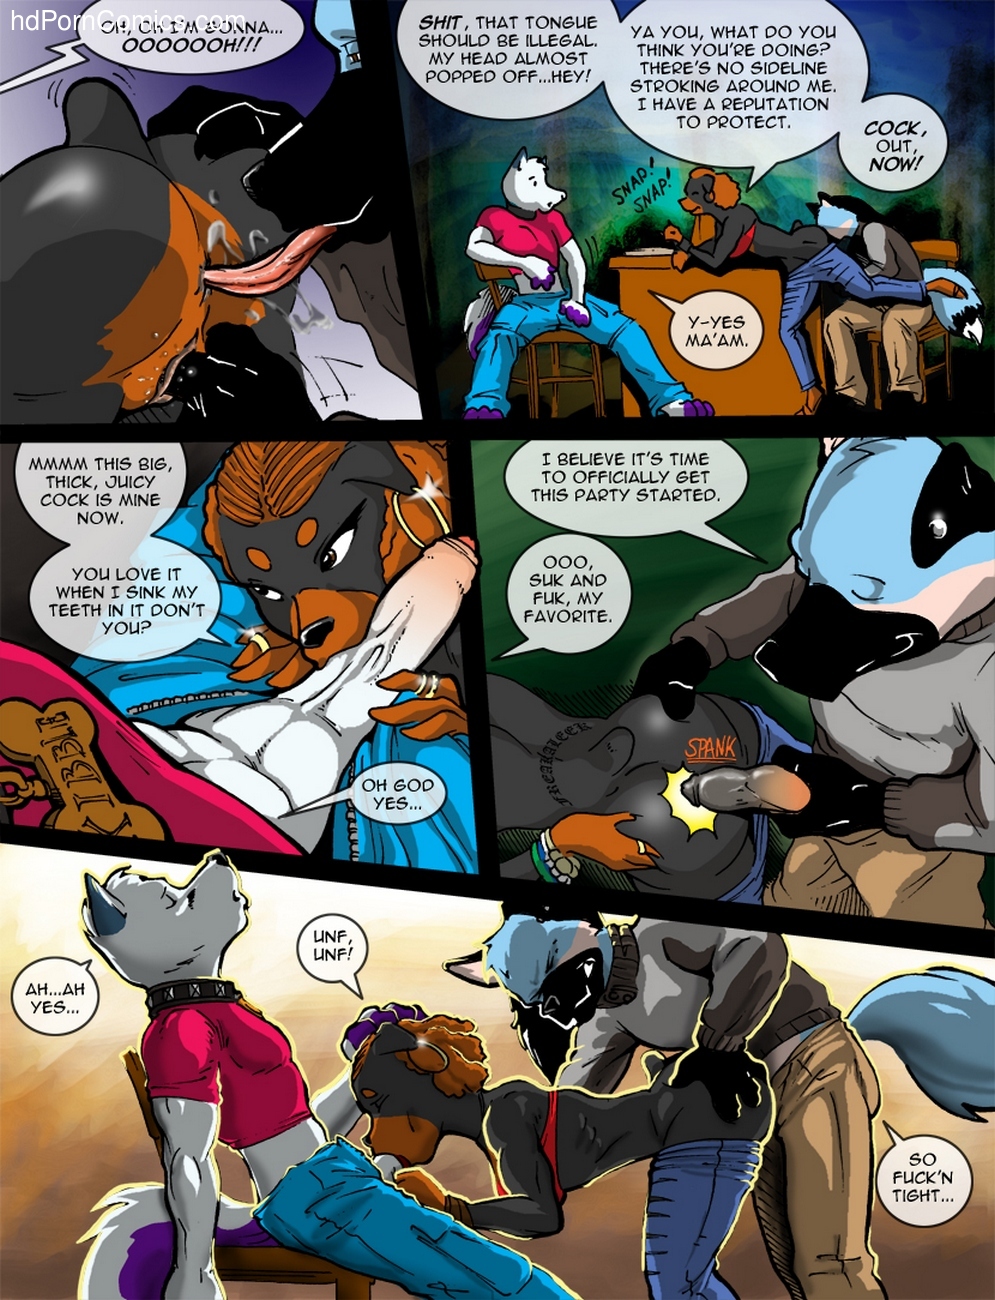 Bisexual Furry Porn - Higher Learning Sex Comic - HD Porn Comics